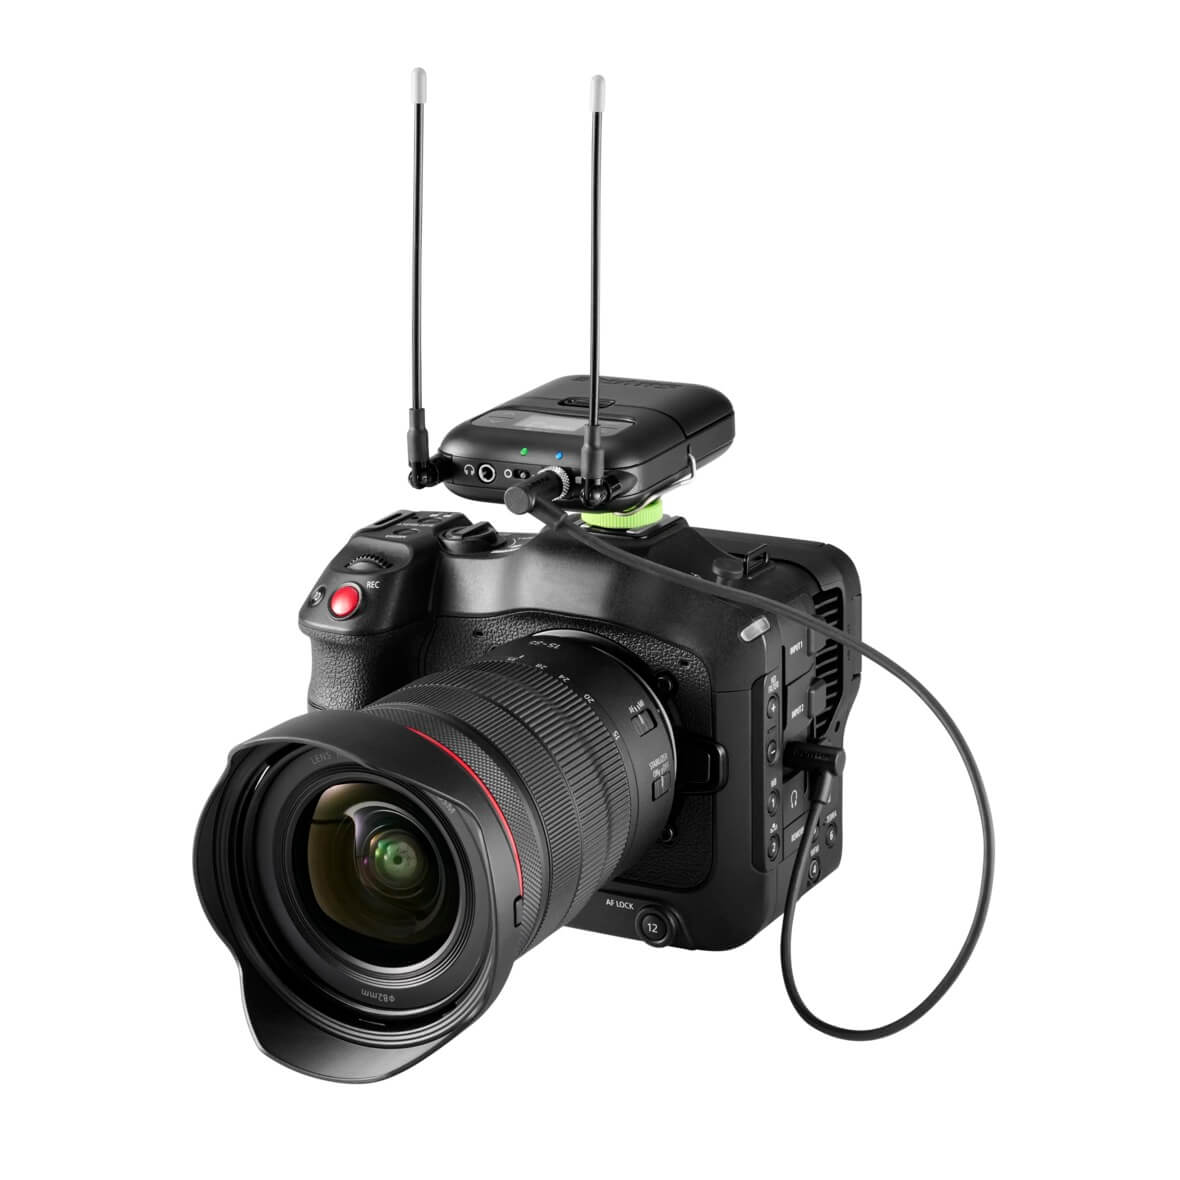 Shure SLXD5 - Portable Digital Wireless Receiver, shown mounted on a DSLR